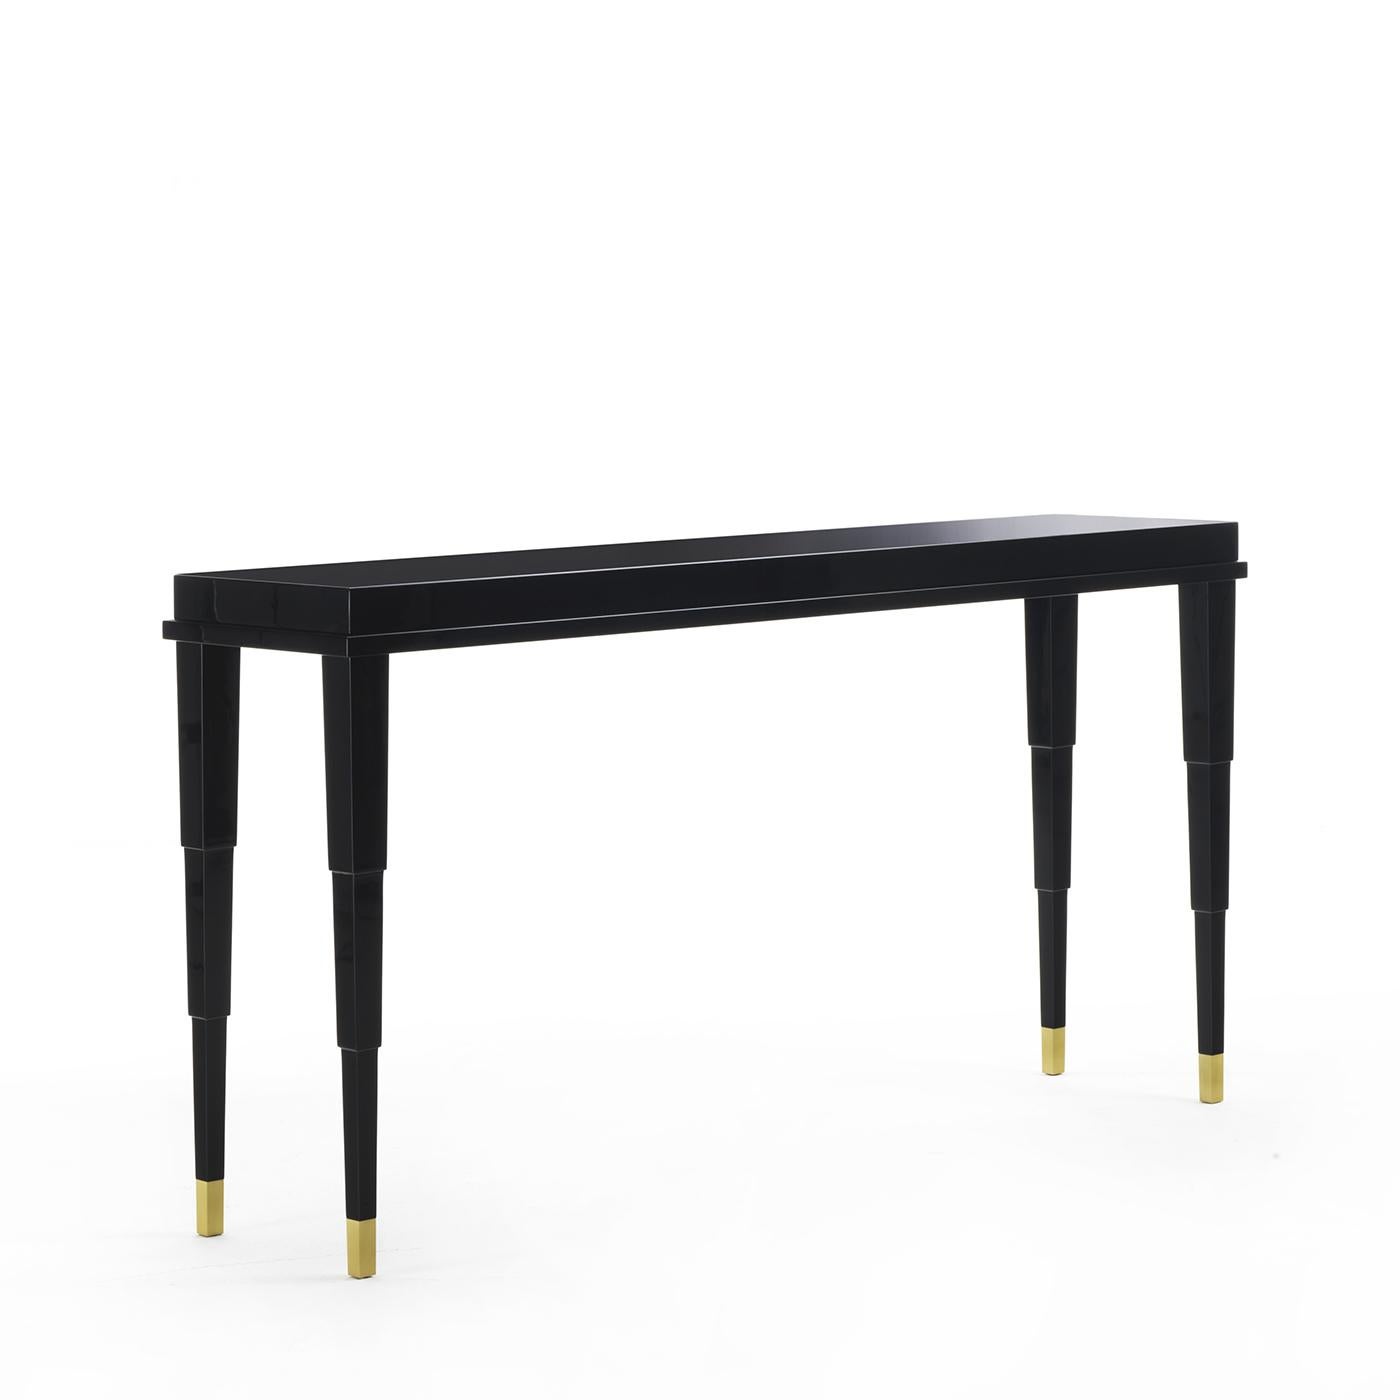 Sophisticated and timeless, this console is a stunning entryway piece for a modern or Classic home, where it will create a glamorous first impression, thanks to its elegant materials and unique silhouette. The structure in solid wood boasts a